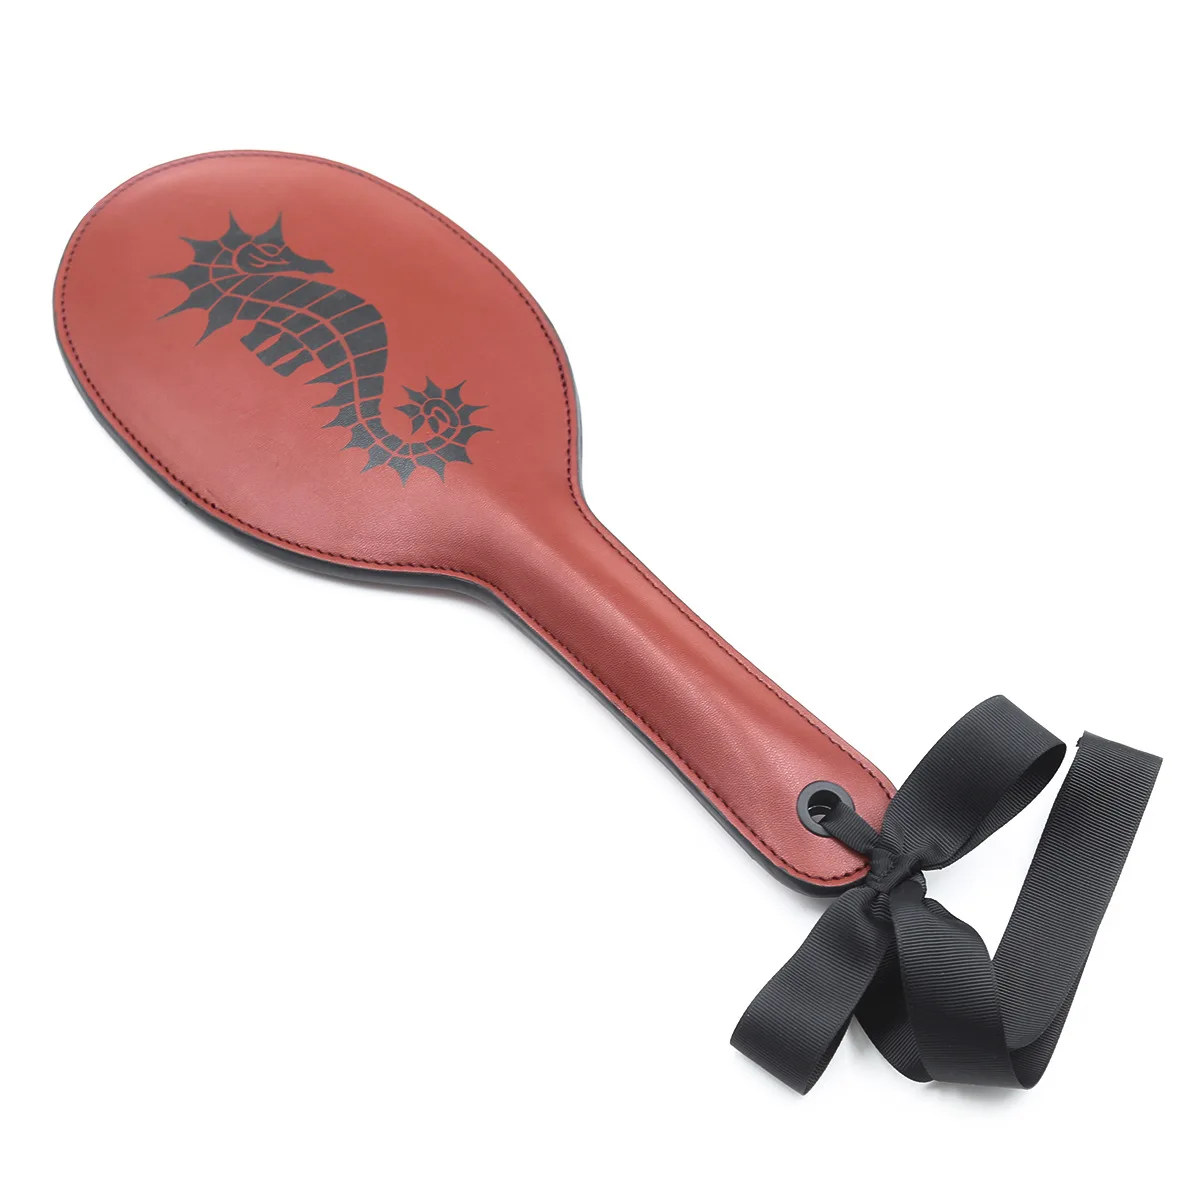 385cm-pu-leather-equestre-big-paddle-horse-whip-seahorse-printed-pattern-equestrianism-paddle